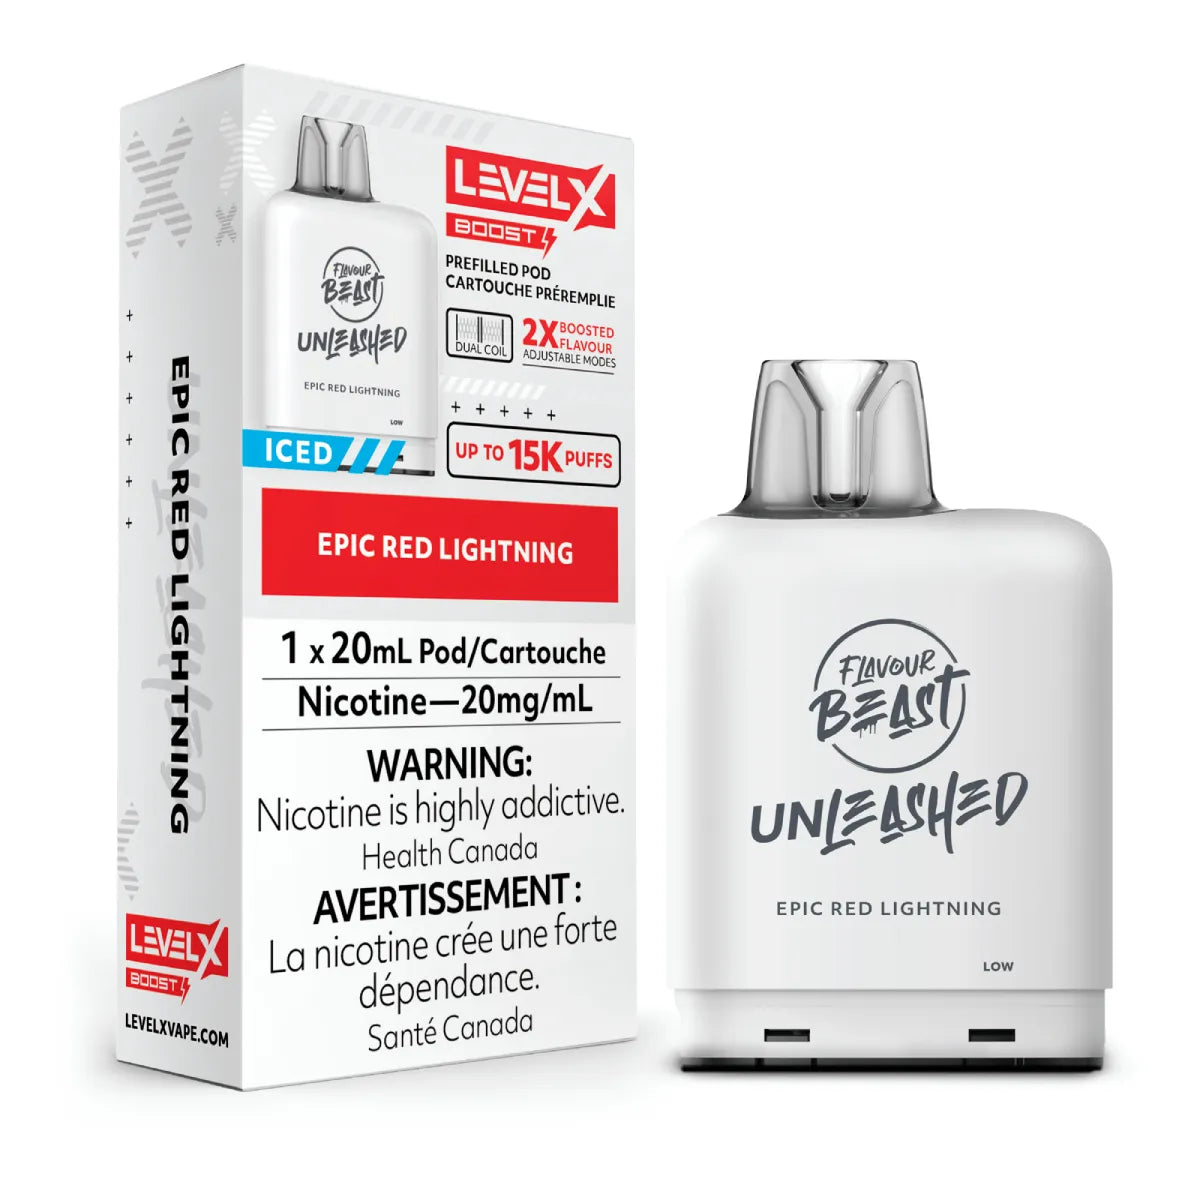 Flavour Beast - Level X Boost Pods 20mL - Unleashed Epic Red Lightning